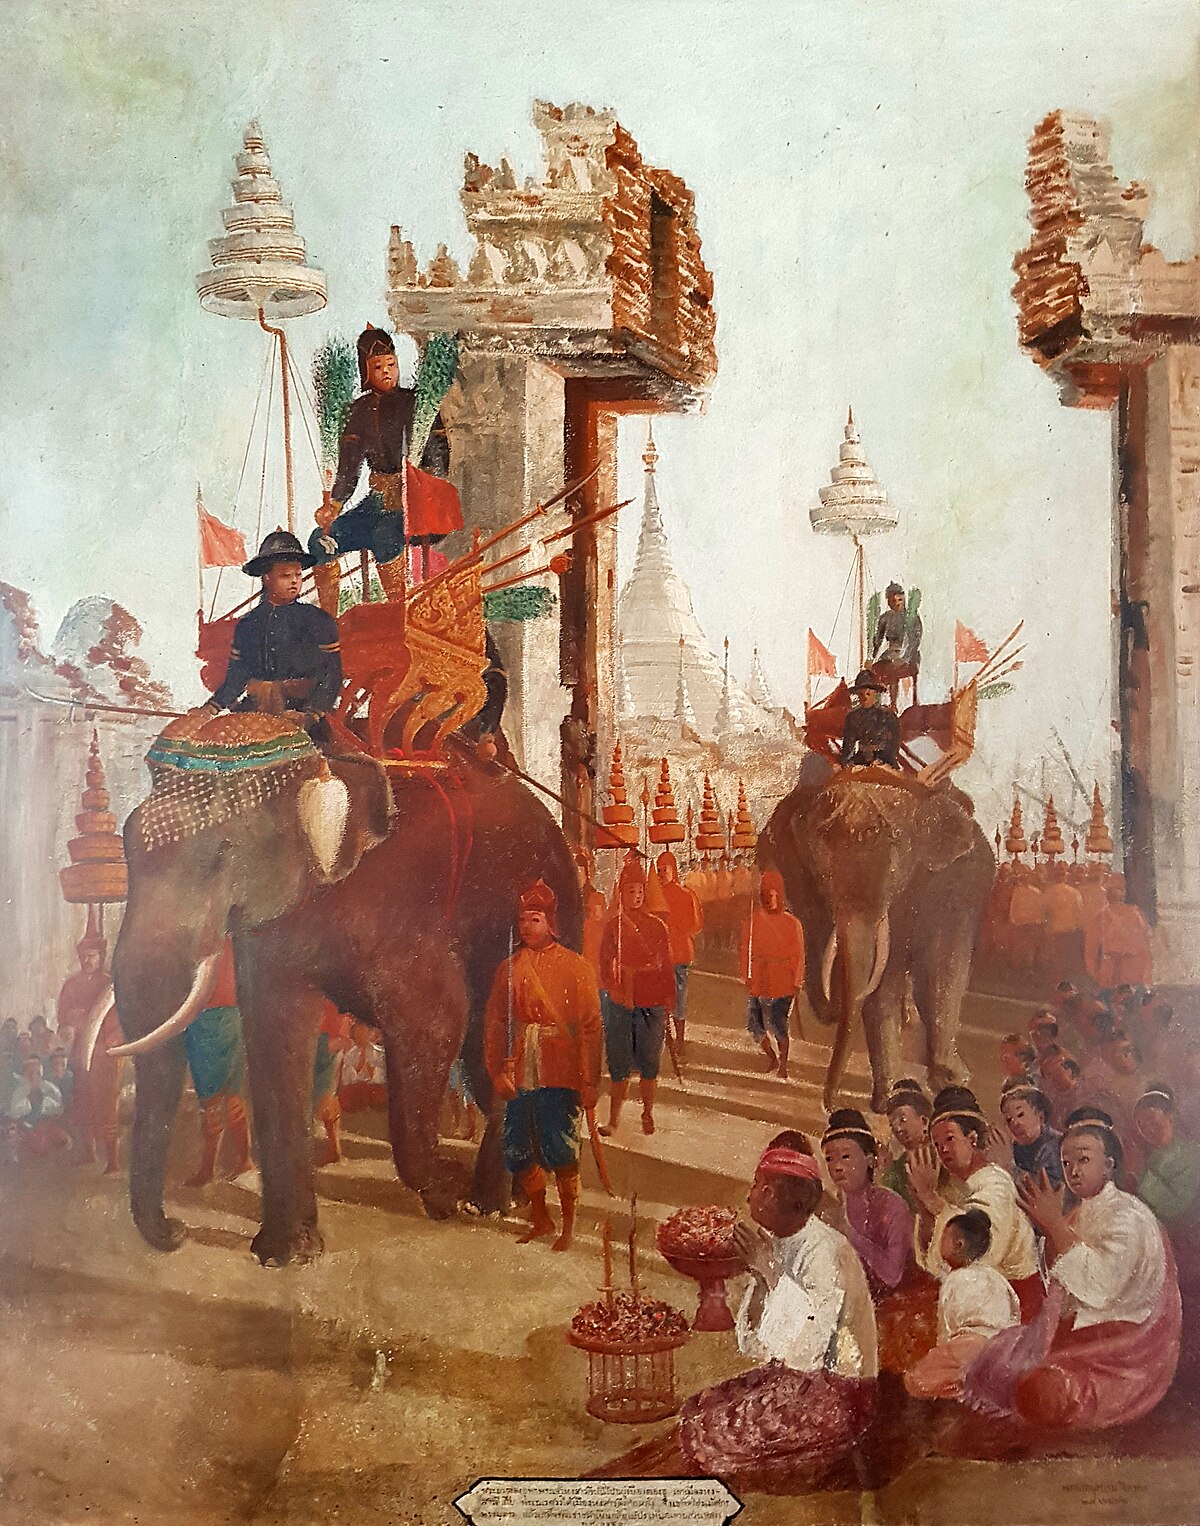 Decline and Fall of Khmer Empire